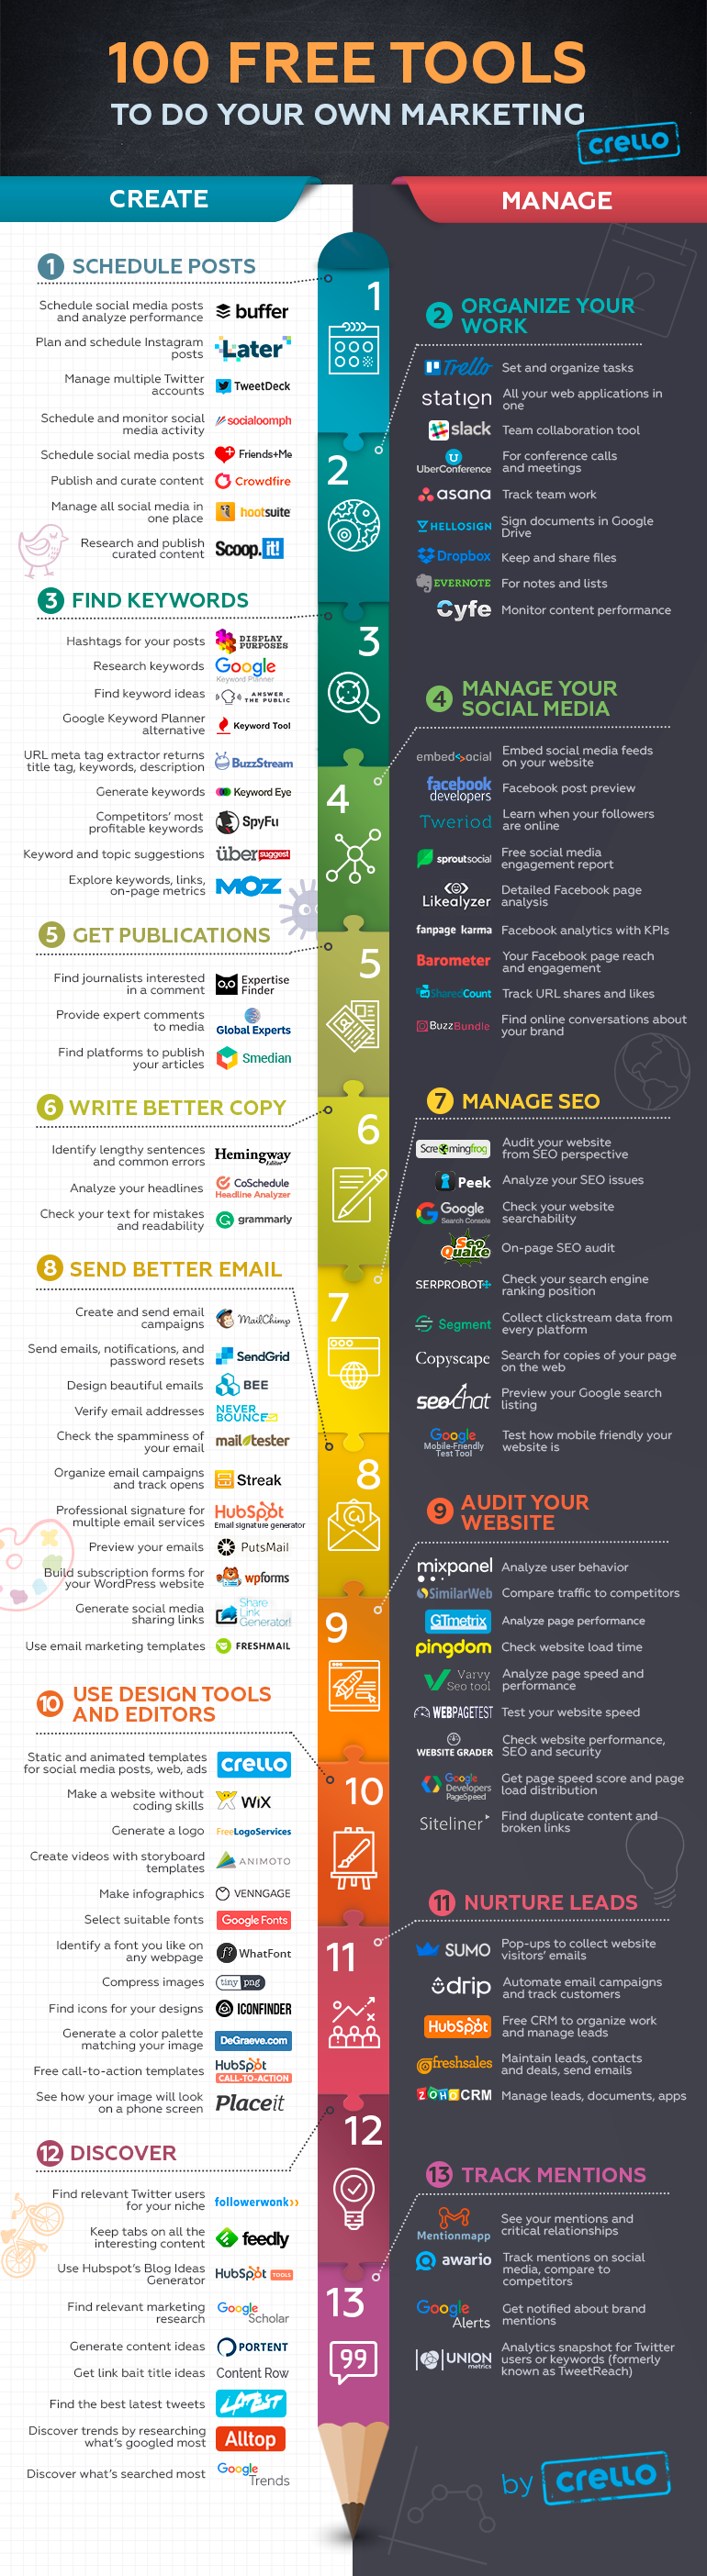 100 of the Best Free Marketing Tools for Your Business - infographic